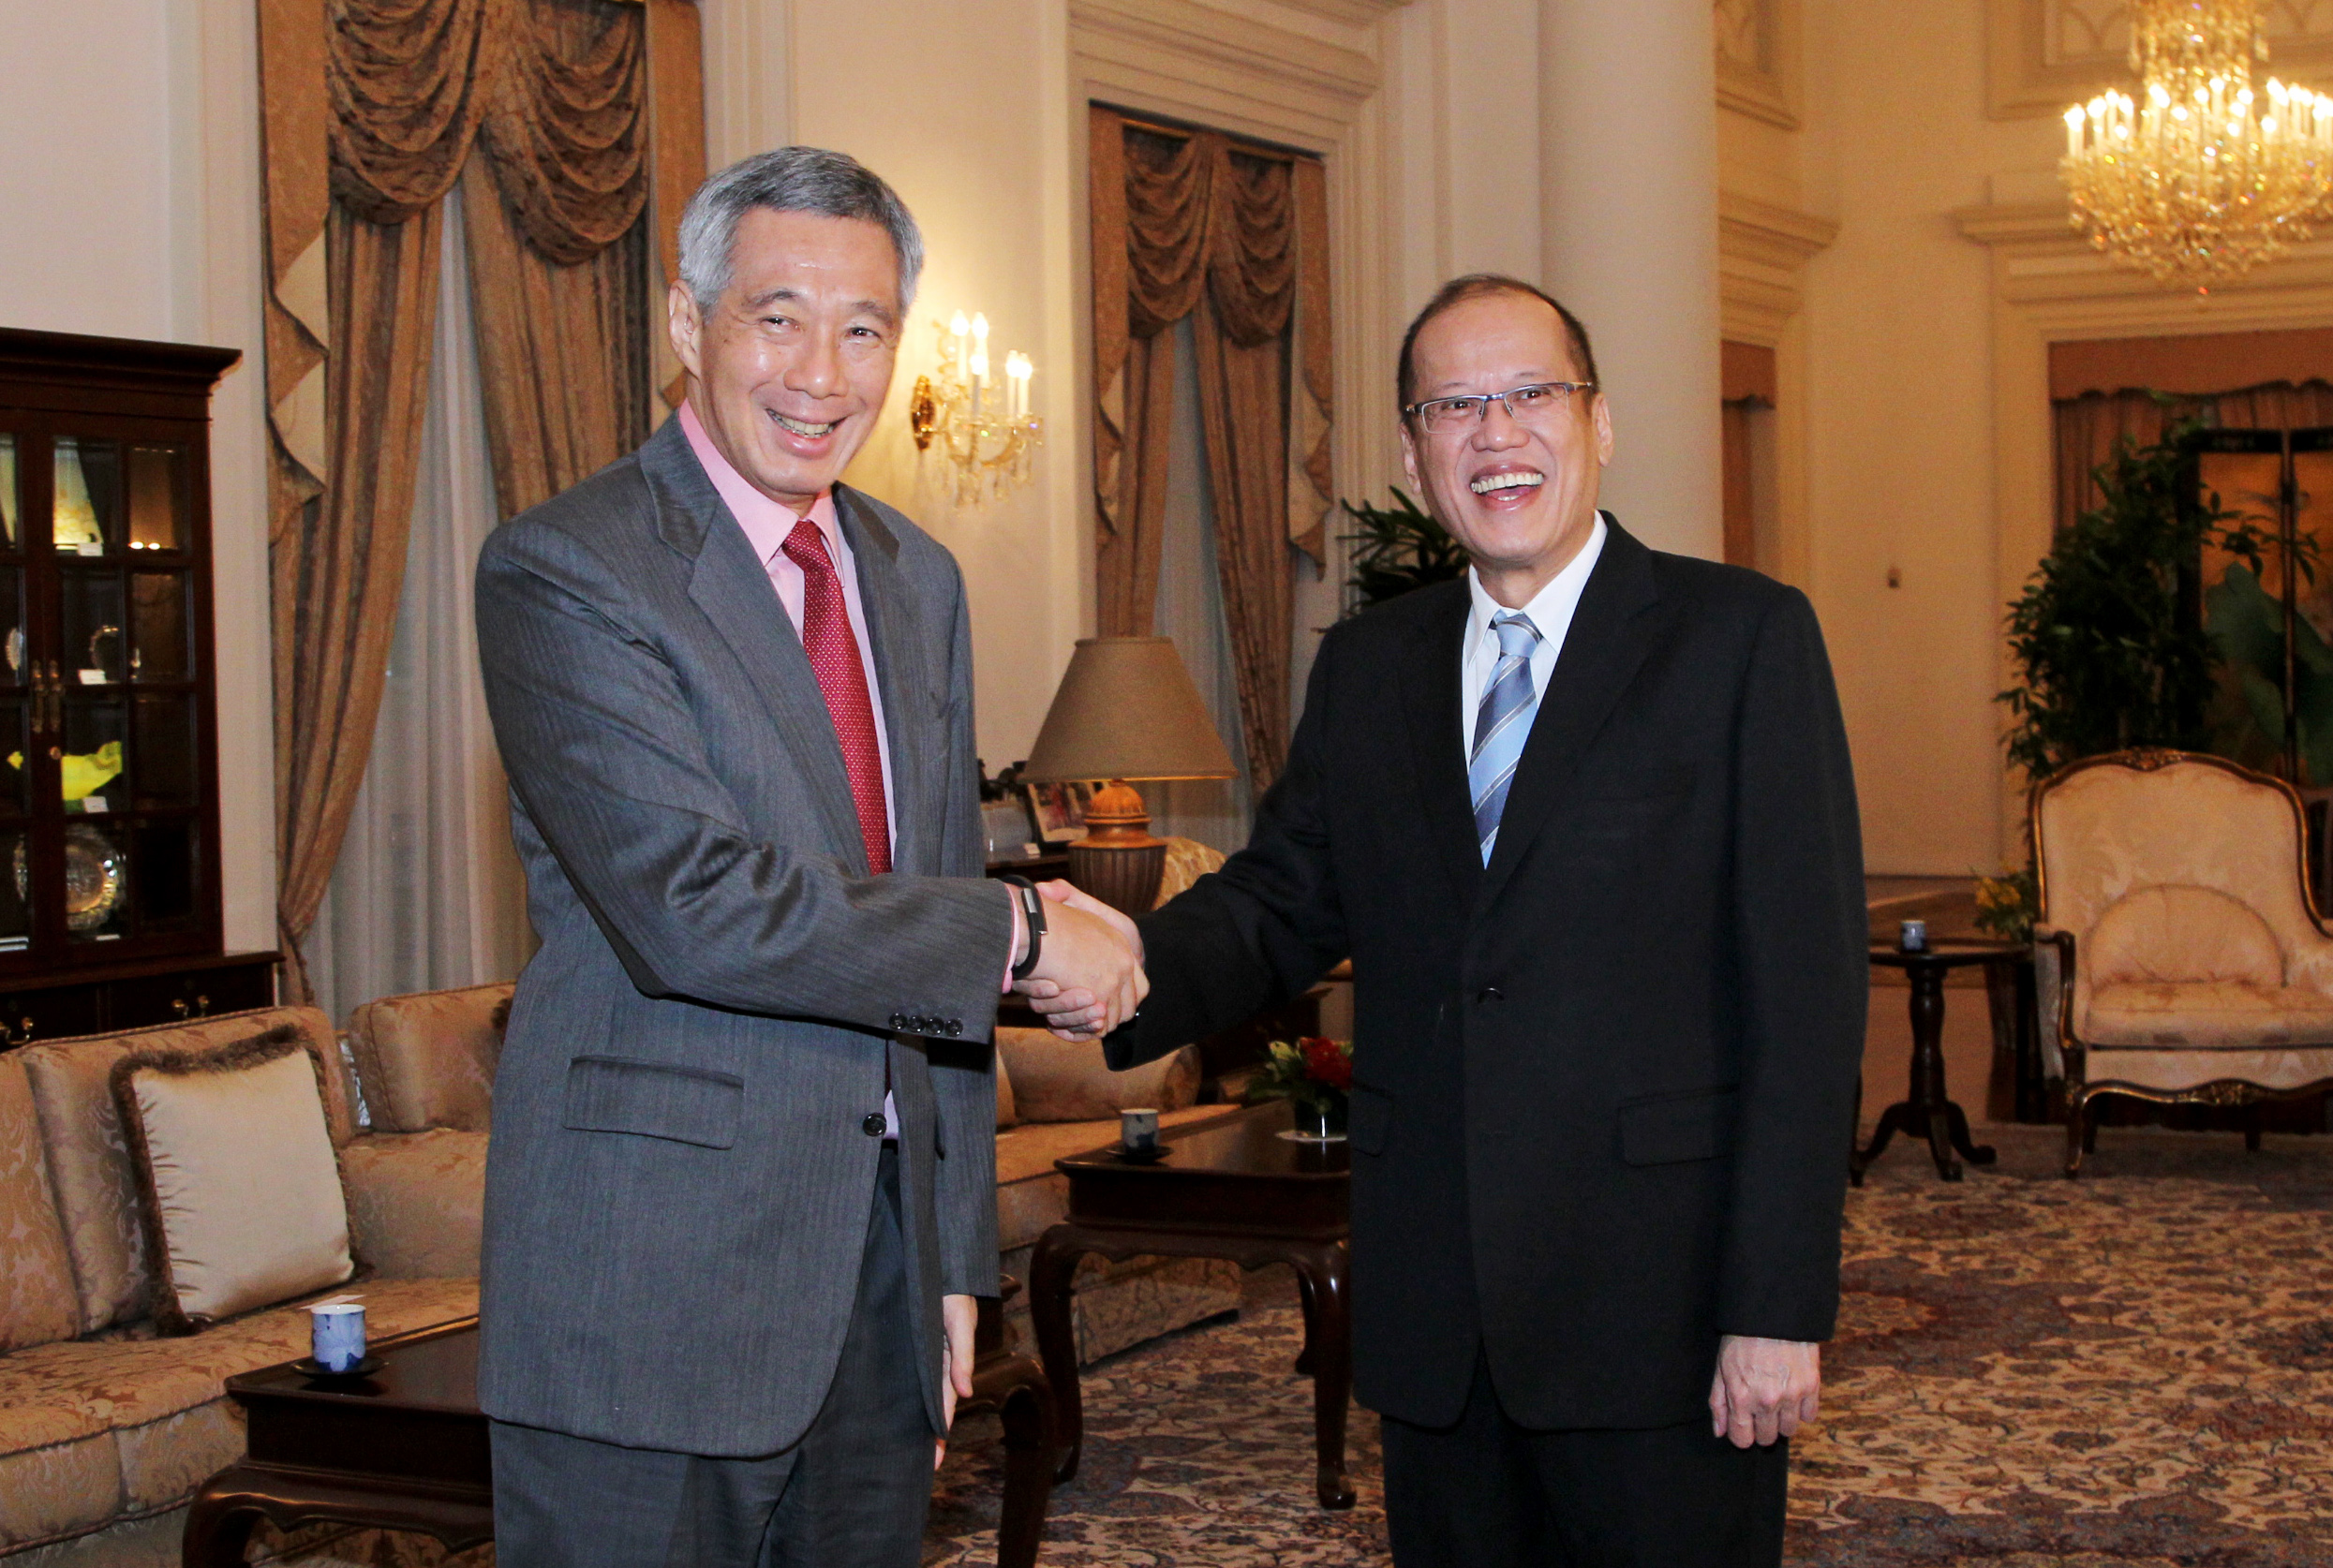 Call by Philippine President Benigno S. Aquino III on Prime Minister Lee Hsien Loong at the Istana on 18 Nov 2014 (MCI Photo by Chwee)